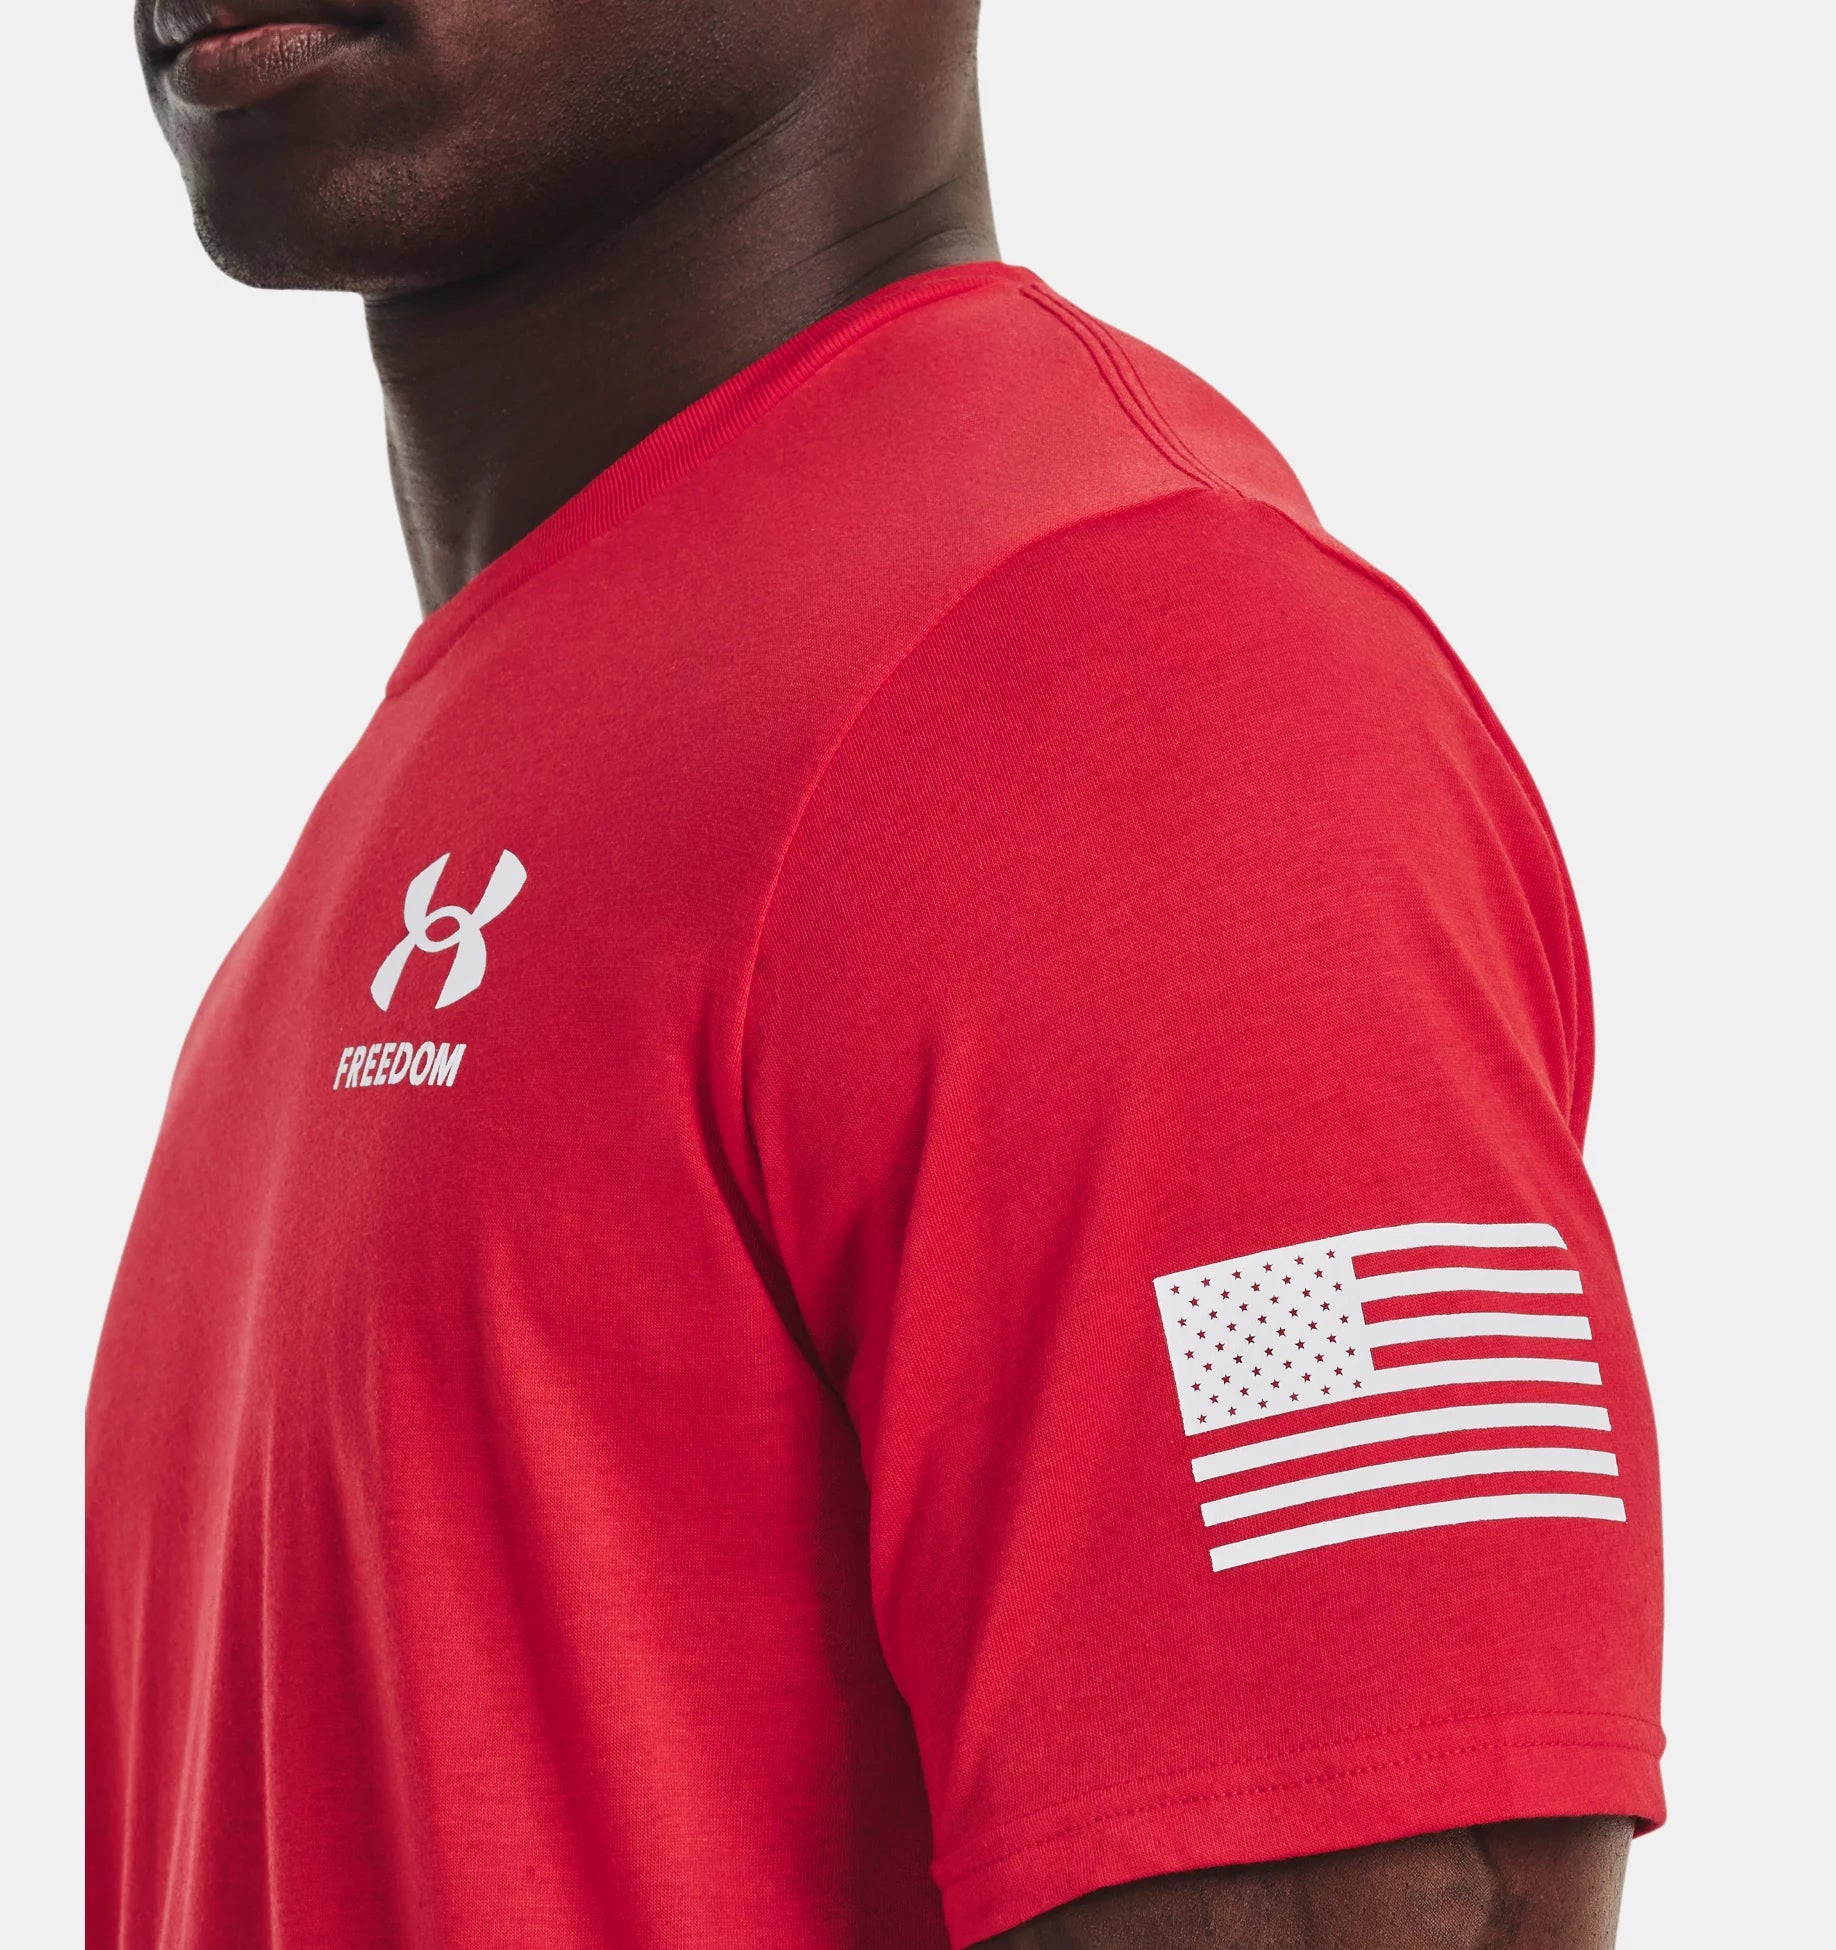 Under Armour Freedom Flag T-Shirt 1370810 - Red, M